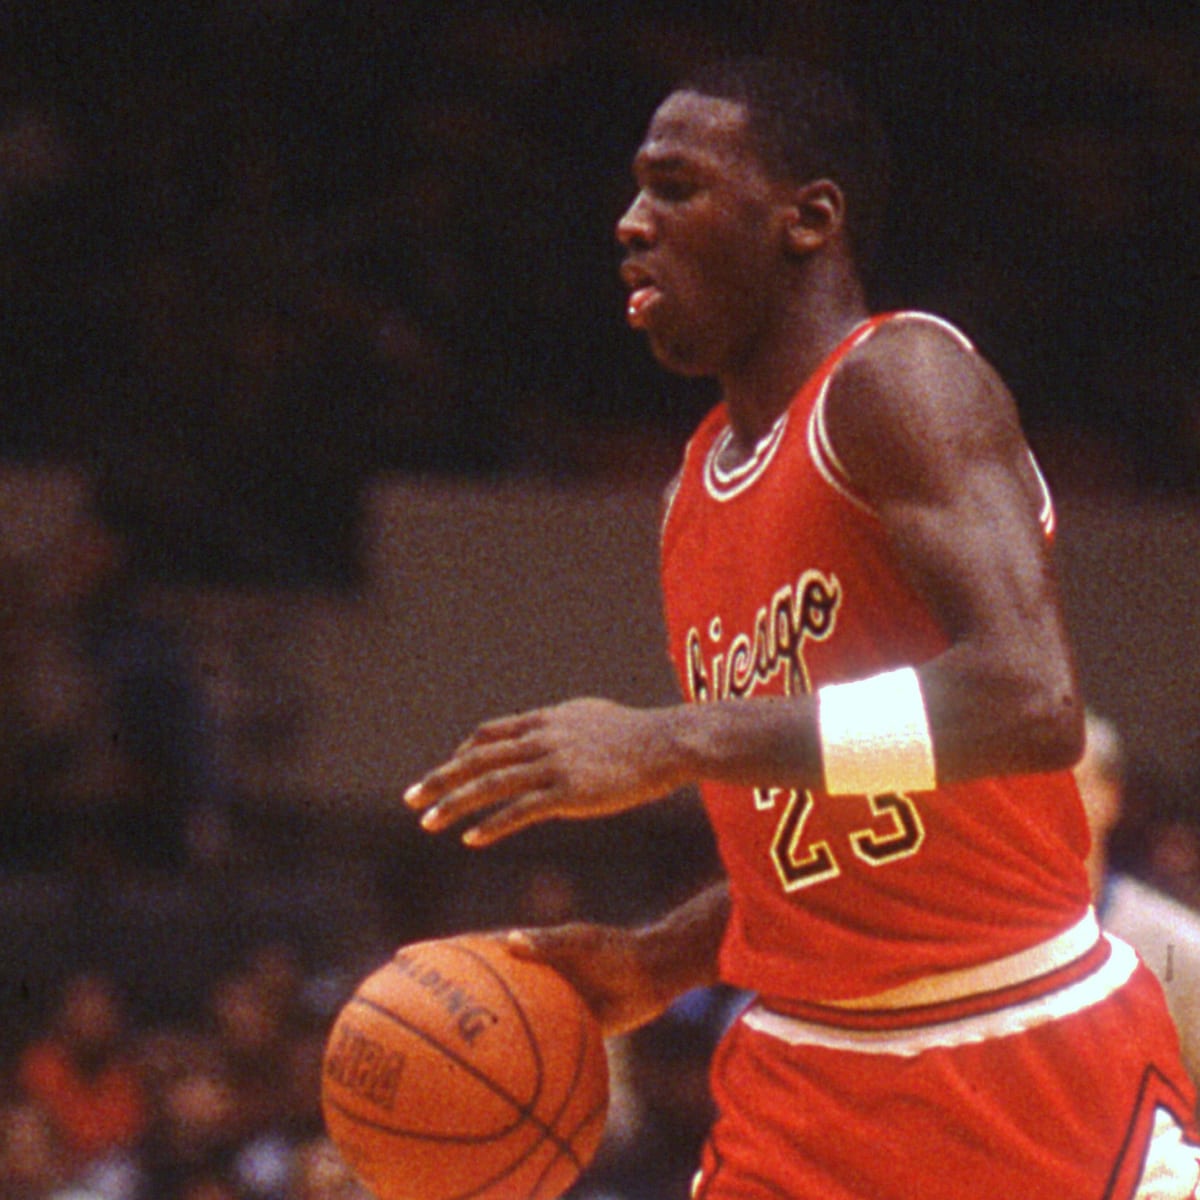 History on This Day: Michael Jordan was named the Rookie of the Year